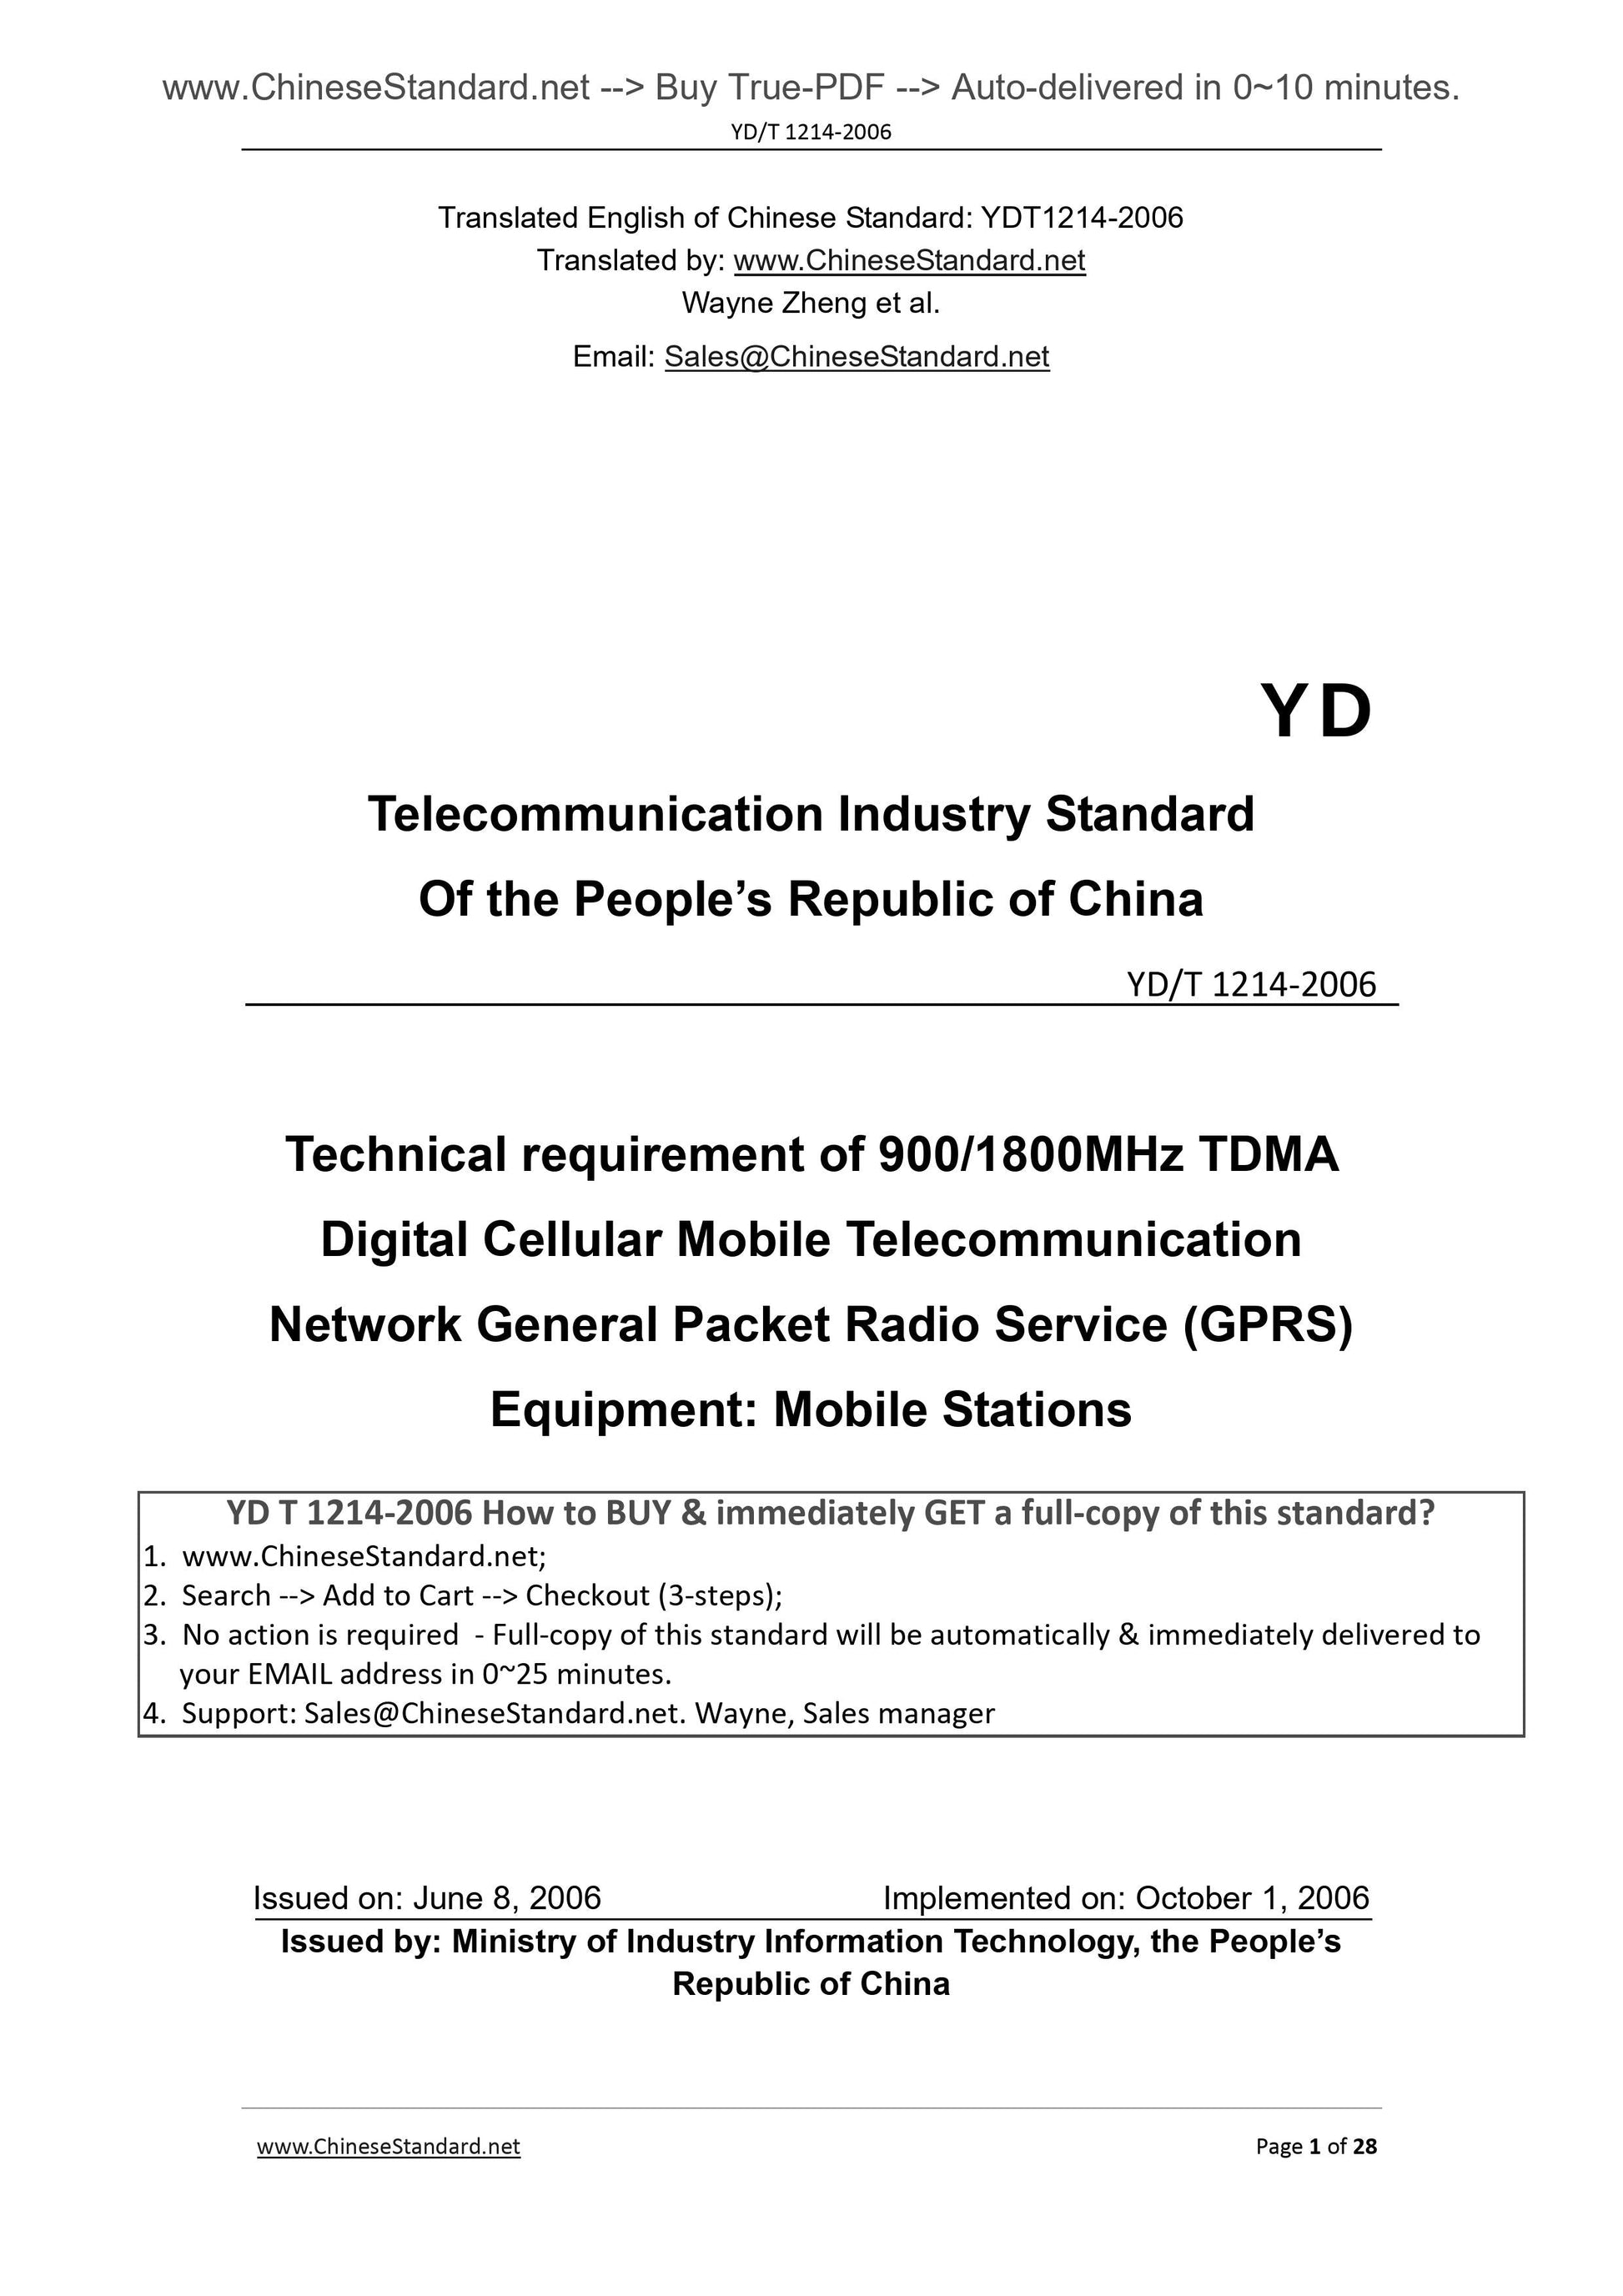 YD/T 1214-2006 Page 1